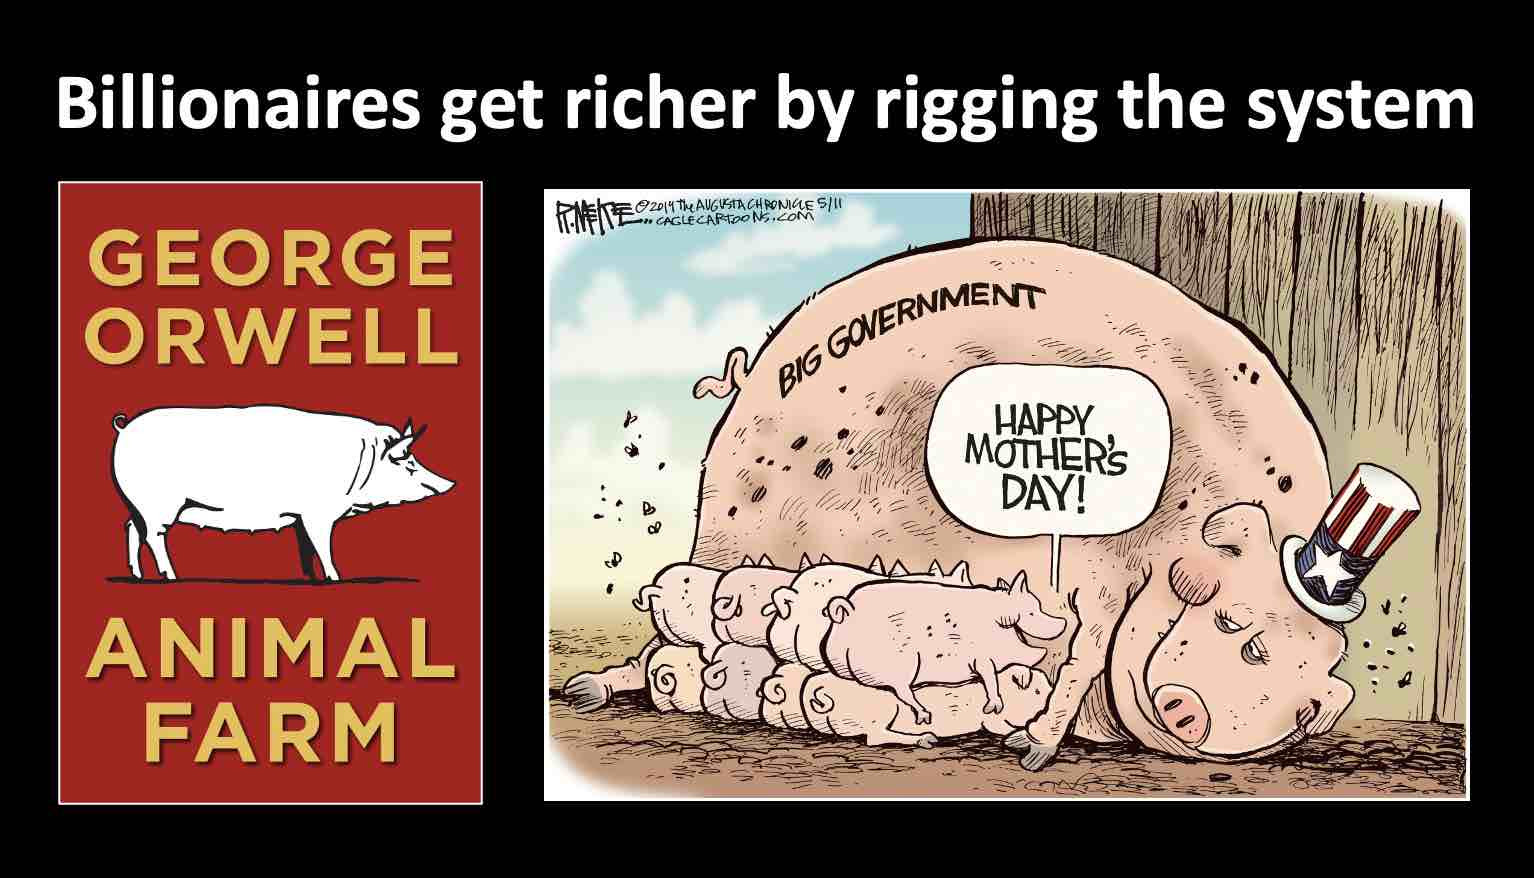 Billionaires get rich exploiting the system just like the pigs in Animal Farm.